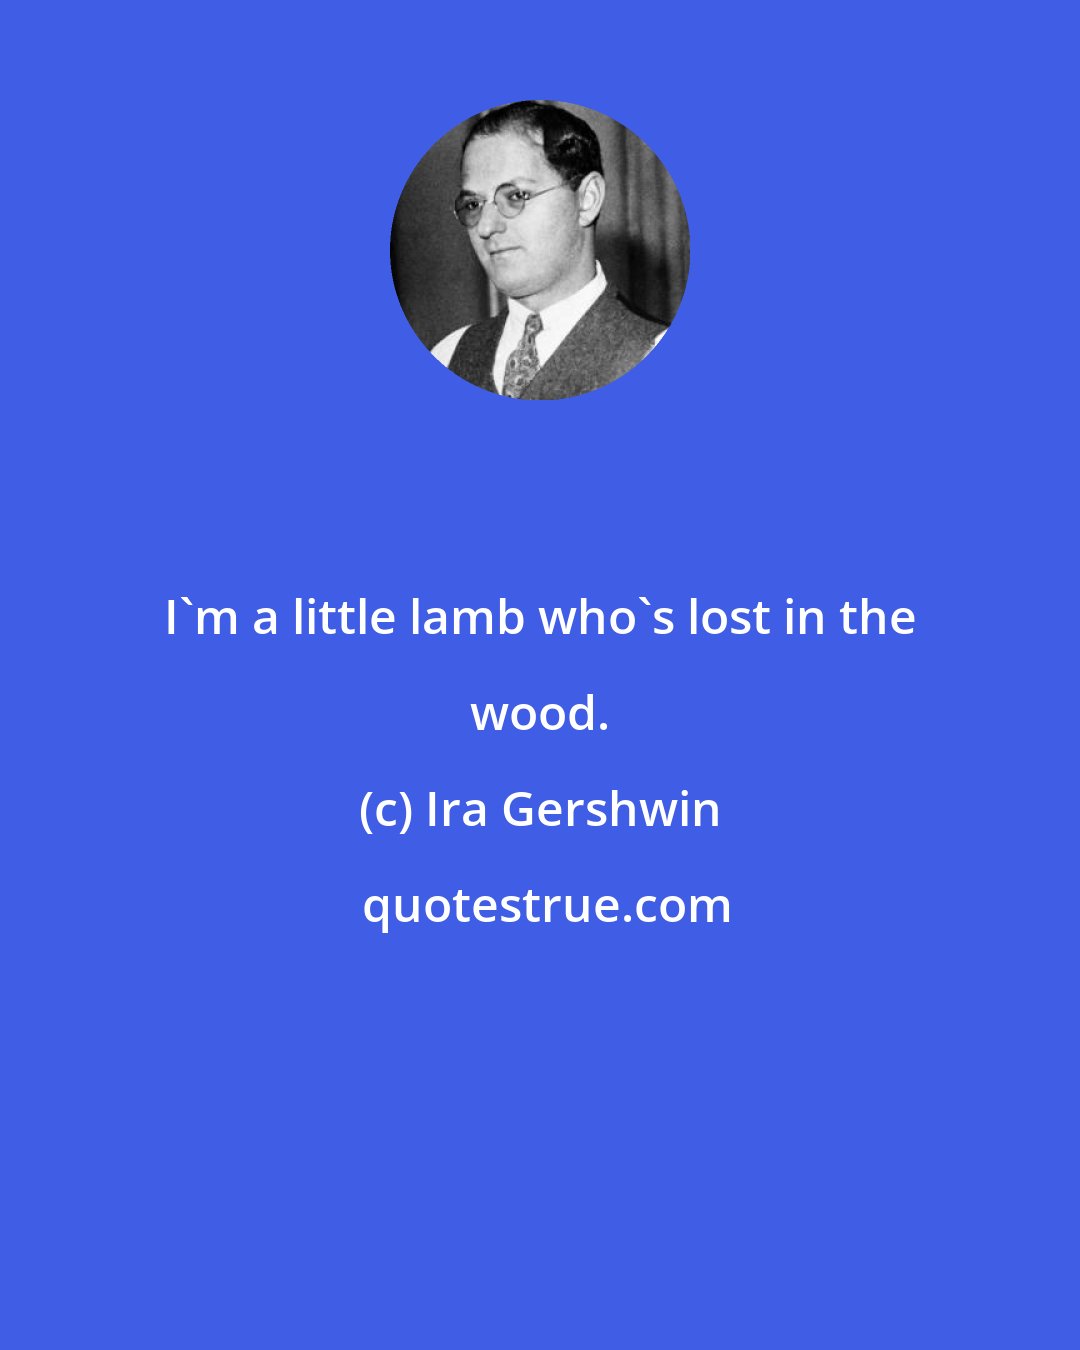 Ira Gershwin: I'm a little lamb who's lost in the wood.